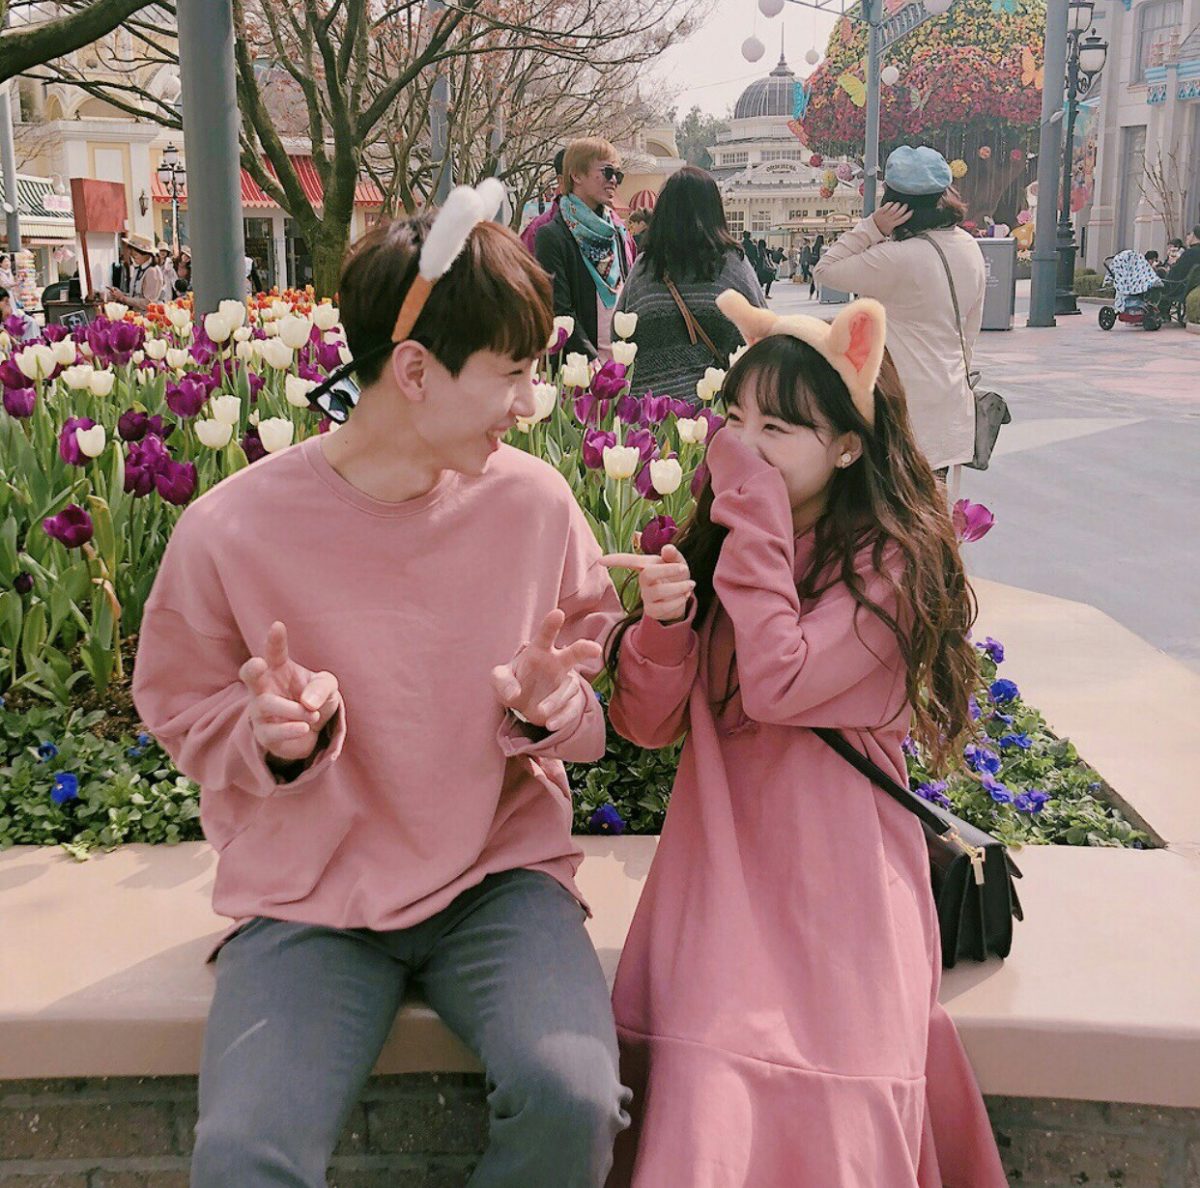 76 images about couple goals. ✽ on We Heart It | See more about couple,  ulzzang and asian